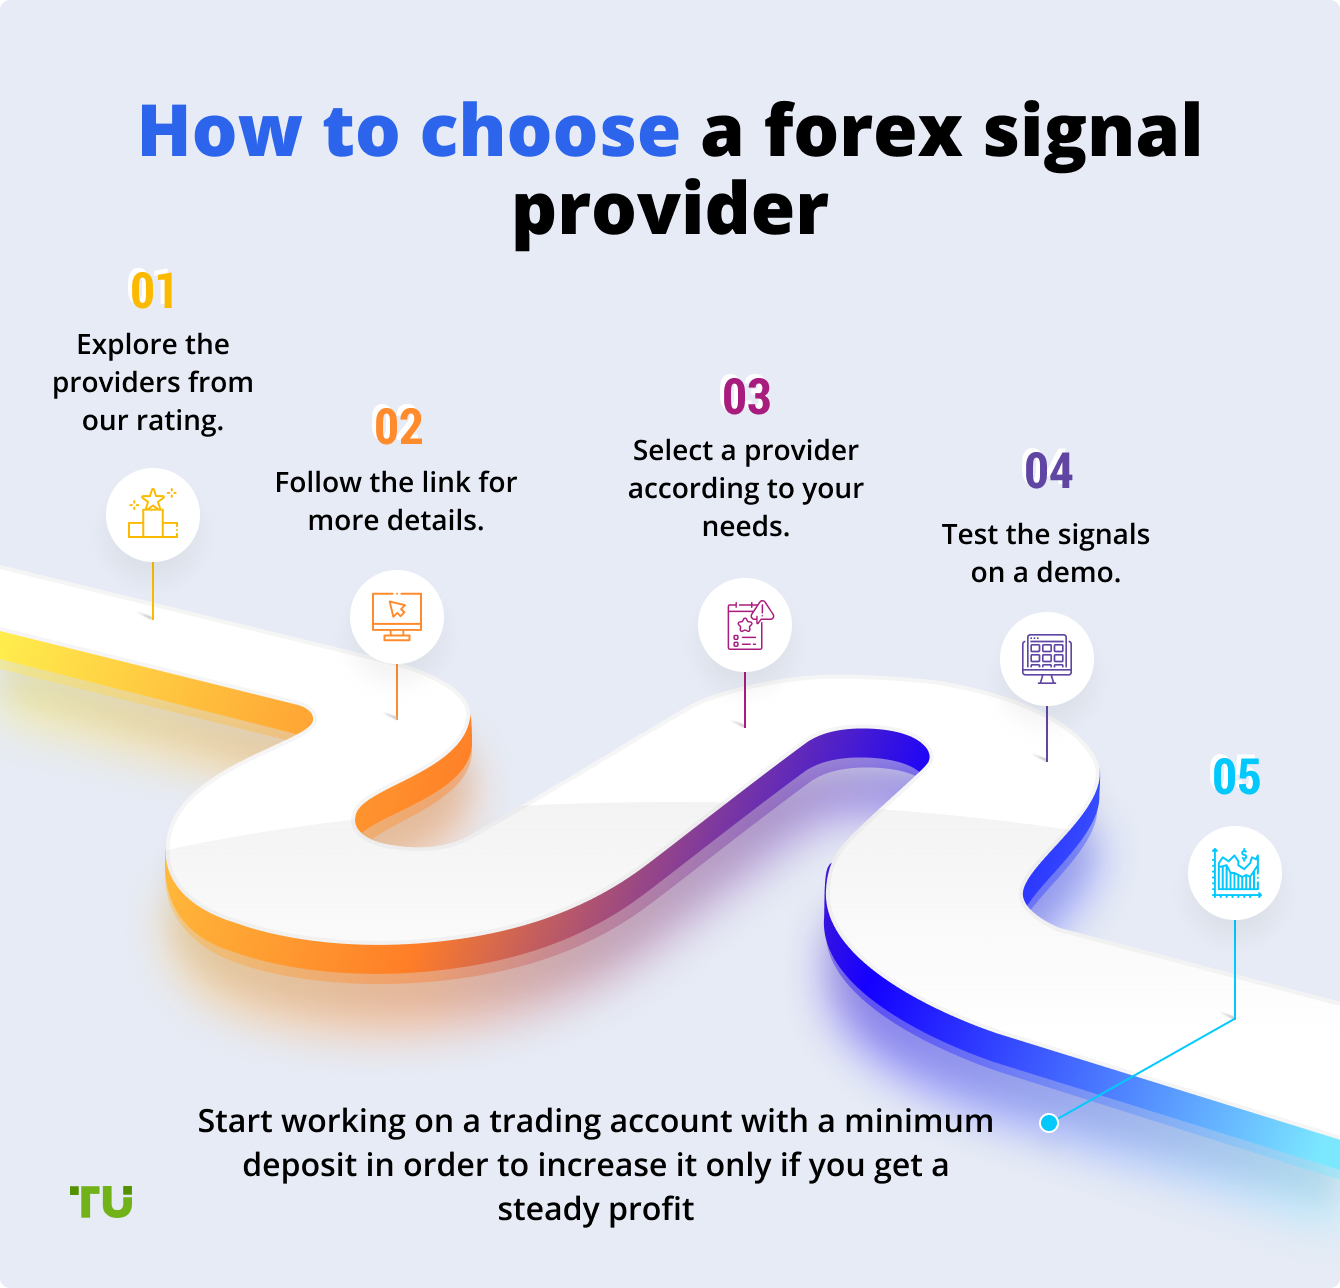 How to choose a forex signal provider